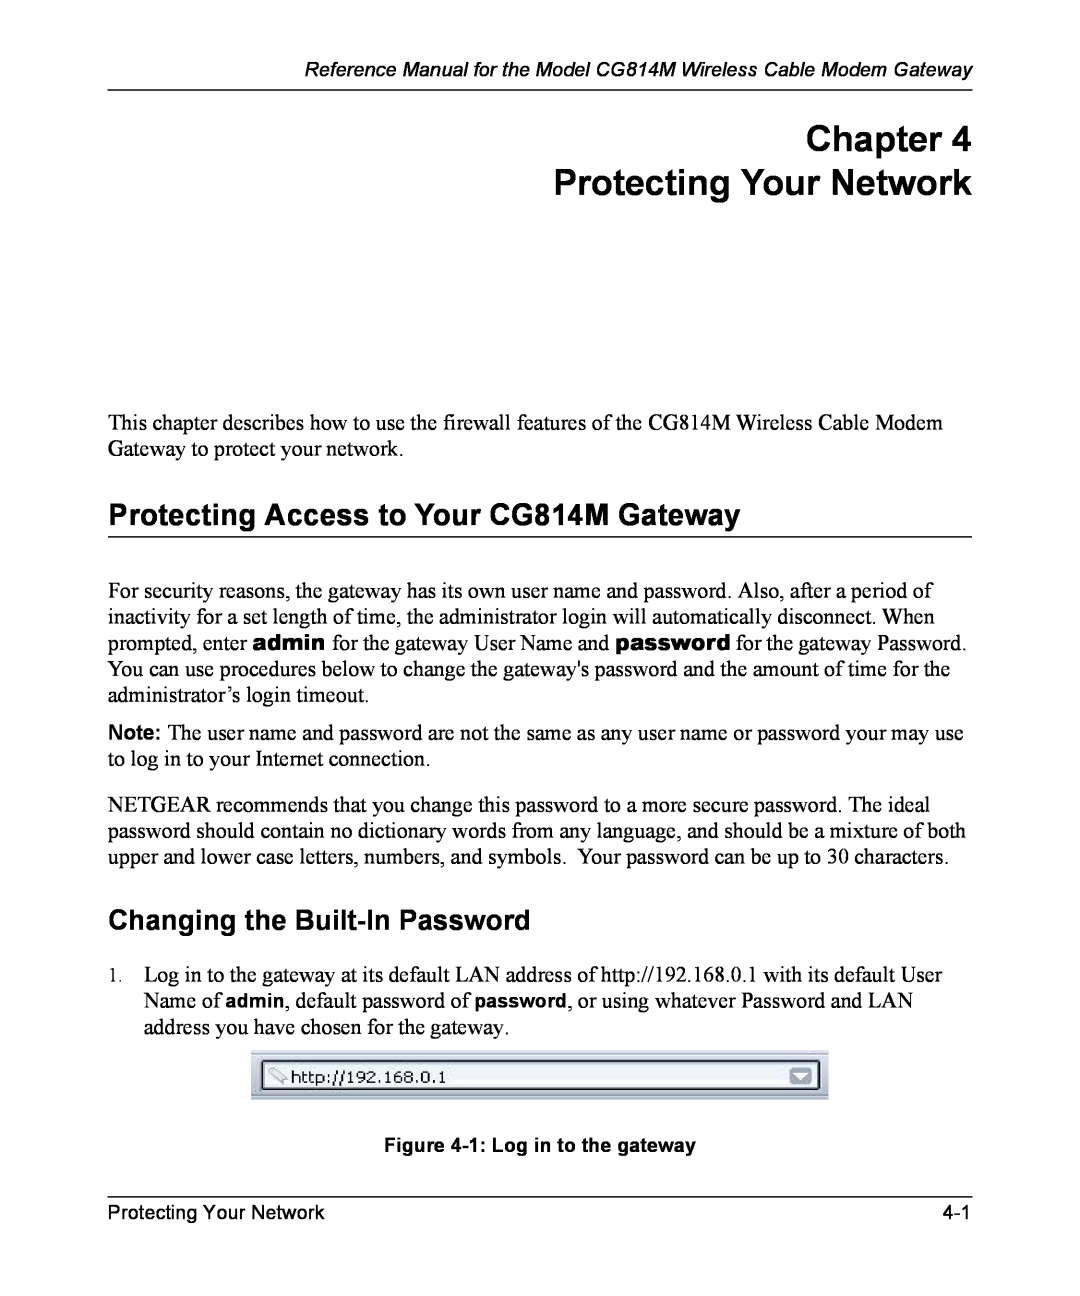 NETGEAR manual Chapter Protecting Your Network, Protecting Access to Your CG814M Gateway, Changing the Built-In Password 